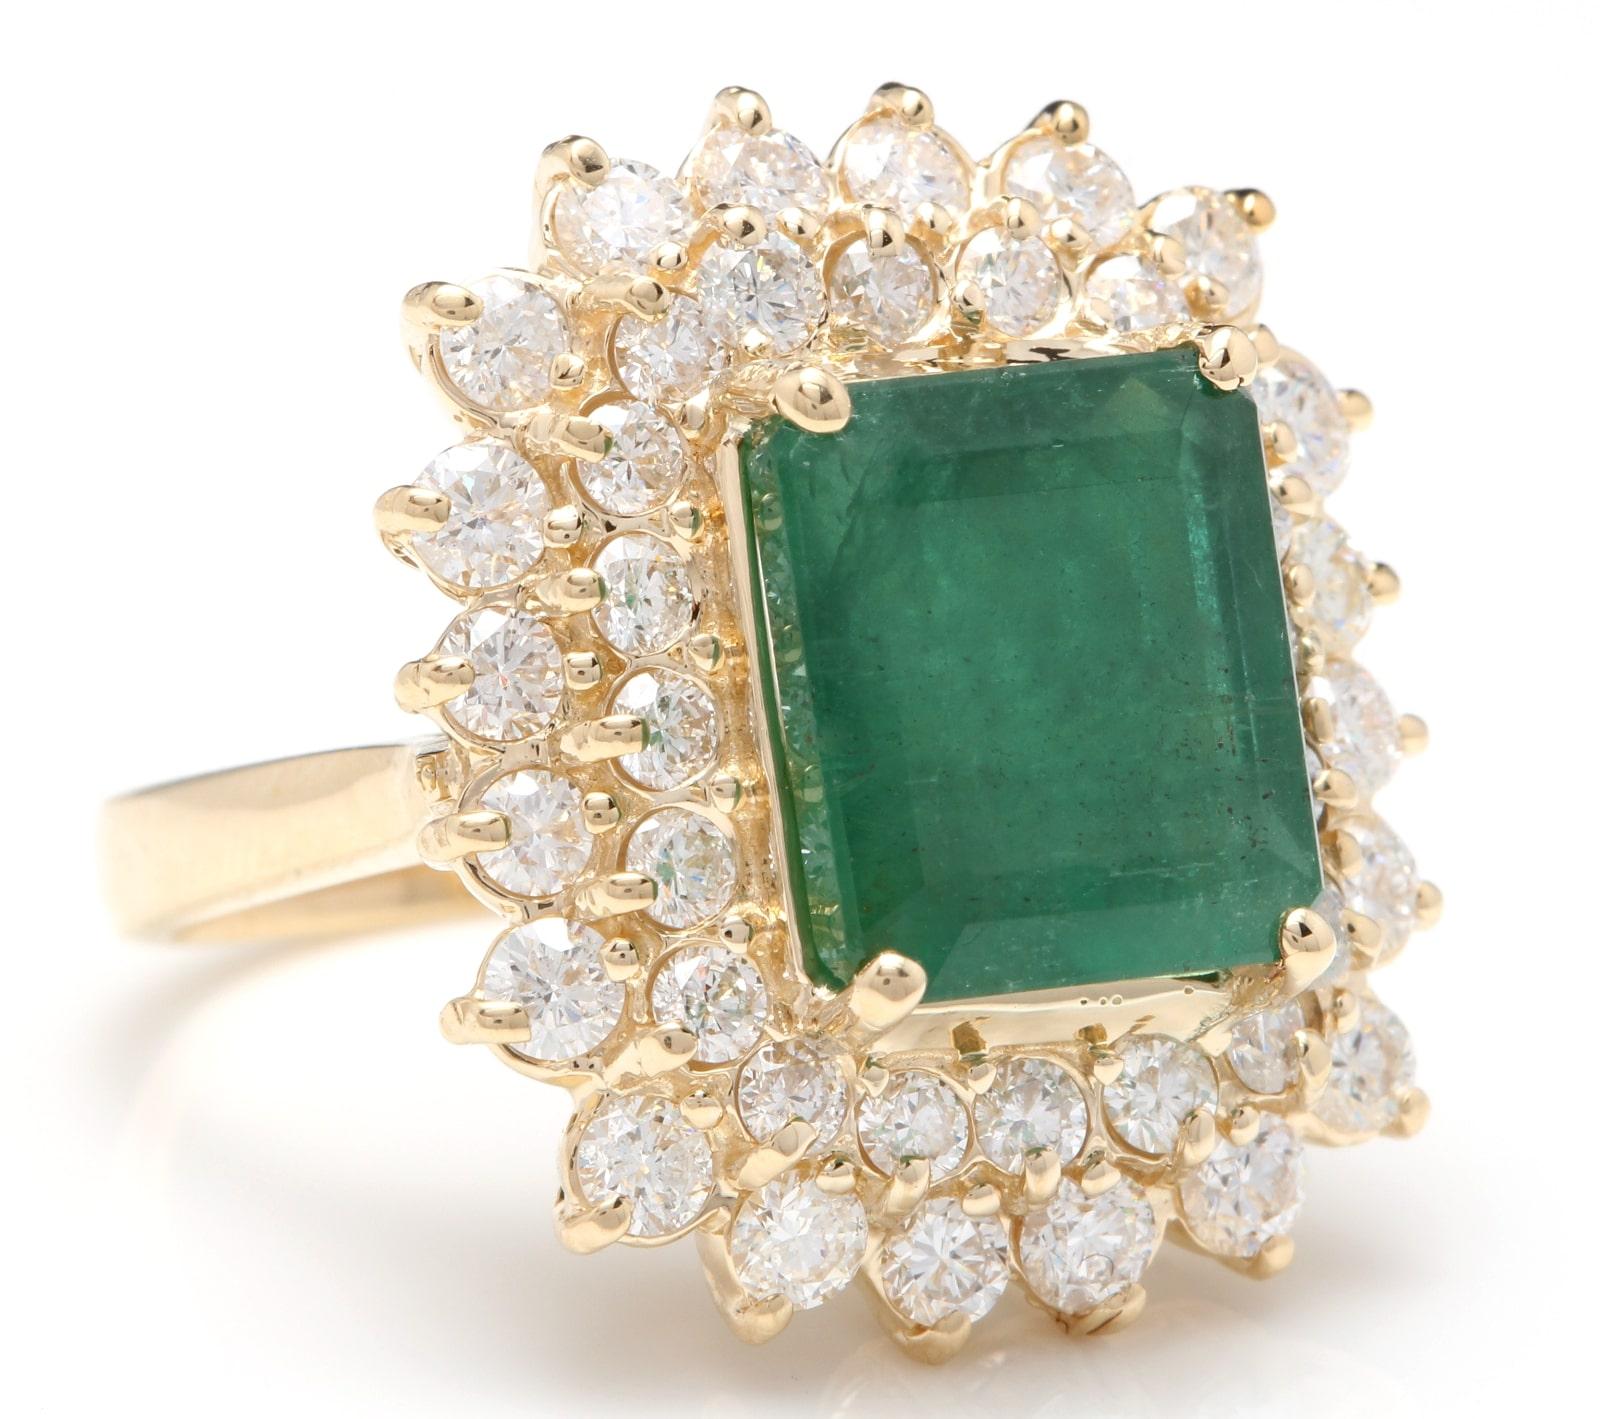 8.70 Carats Natural Emerald and Diamond 14K Solid Yellow Gold Ring

Total Natural Green Emerald Weight is: Approx. 6.40 Carats (transparent) (Oil Treated)

Emerald Measures: Approx. 11.50 x 9.50mm

Natural Round Diamonds Weight: Approx. 2.30 Carats